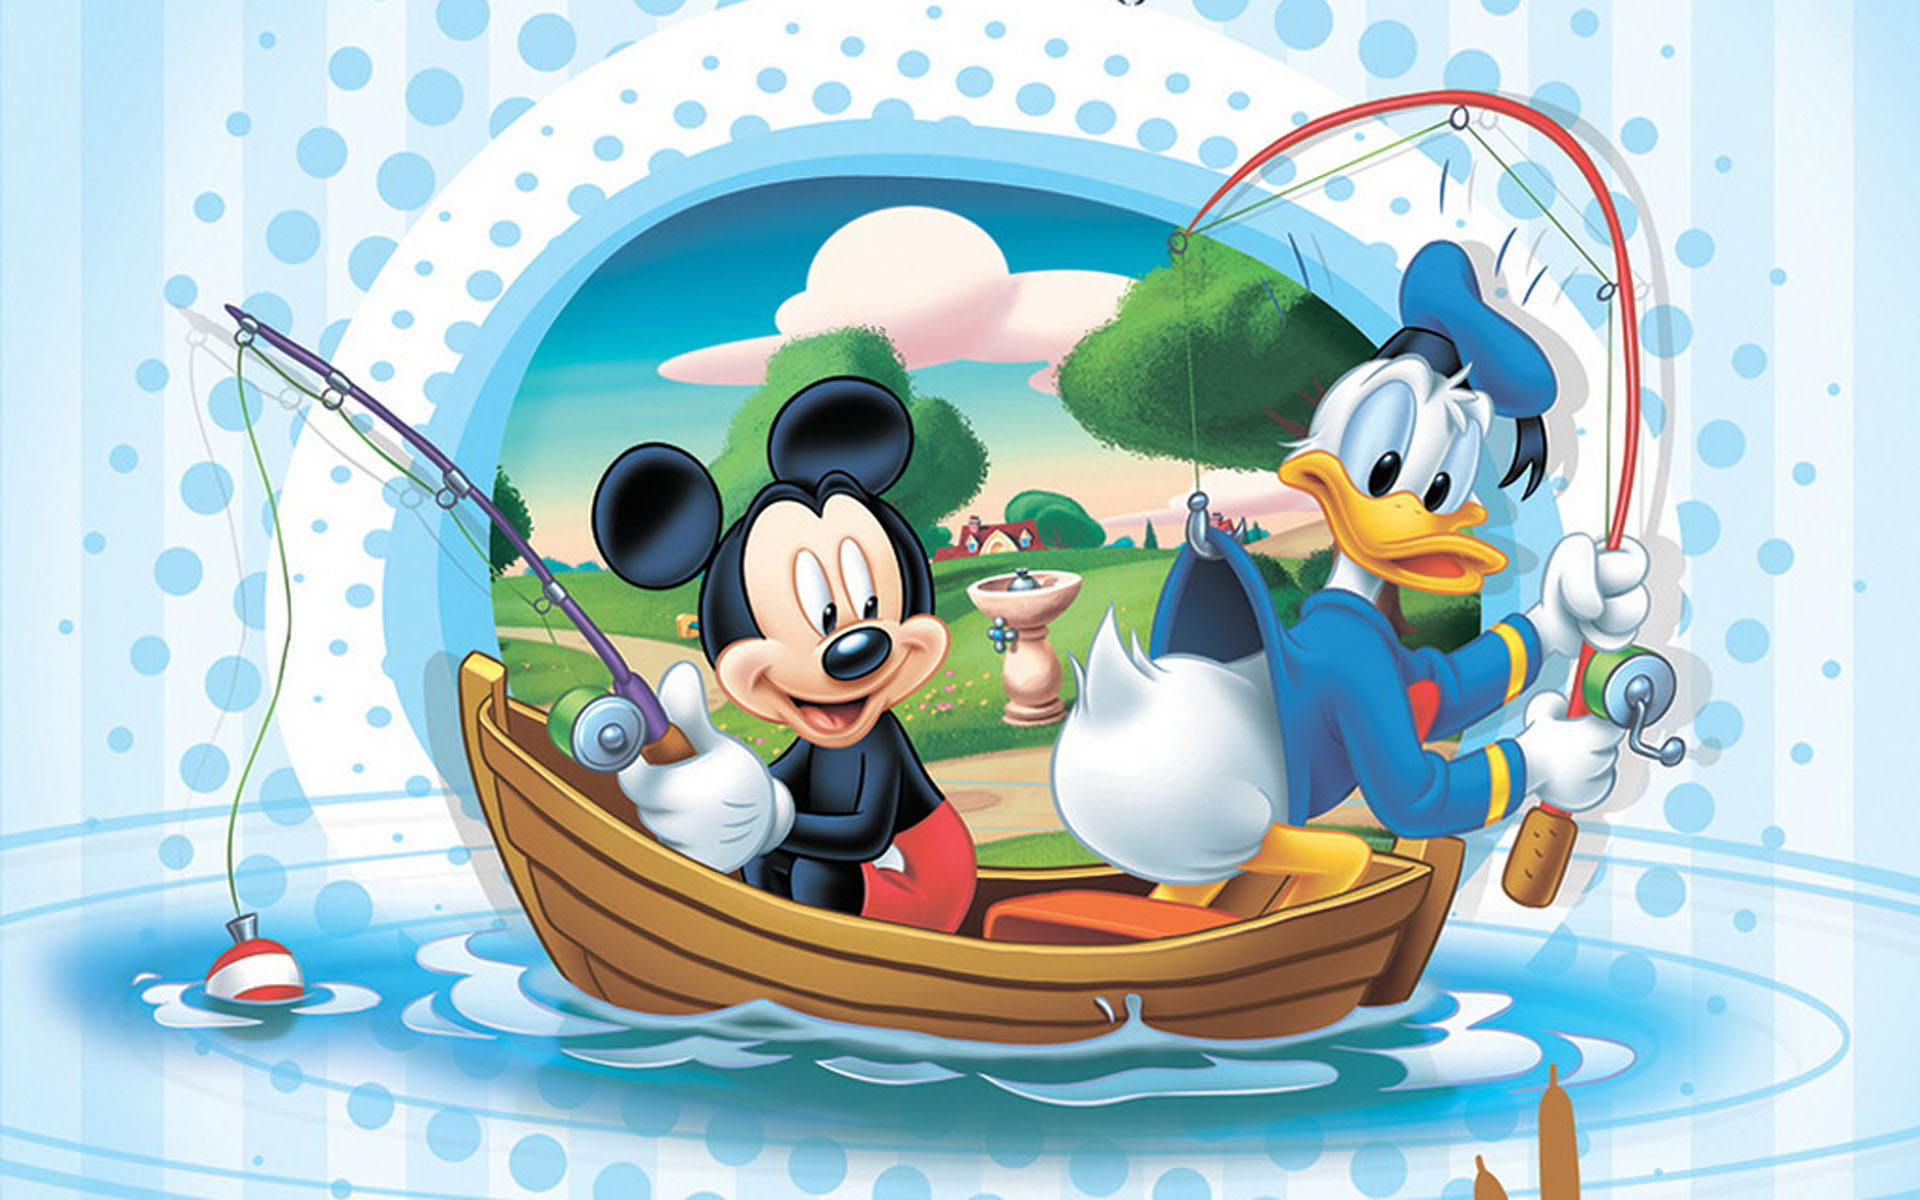 Mickey Mouse And Donald Duck Fishing With Boat Disney Image 1920x1200 